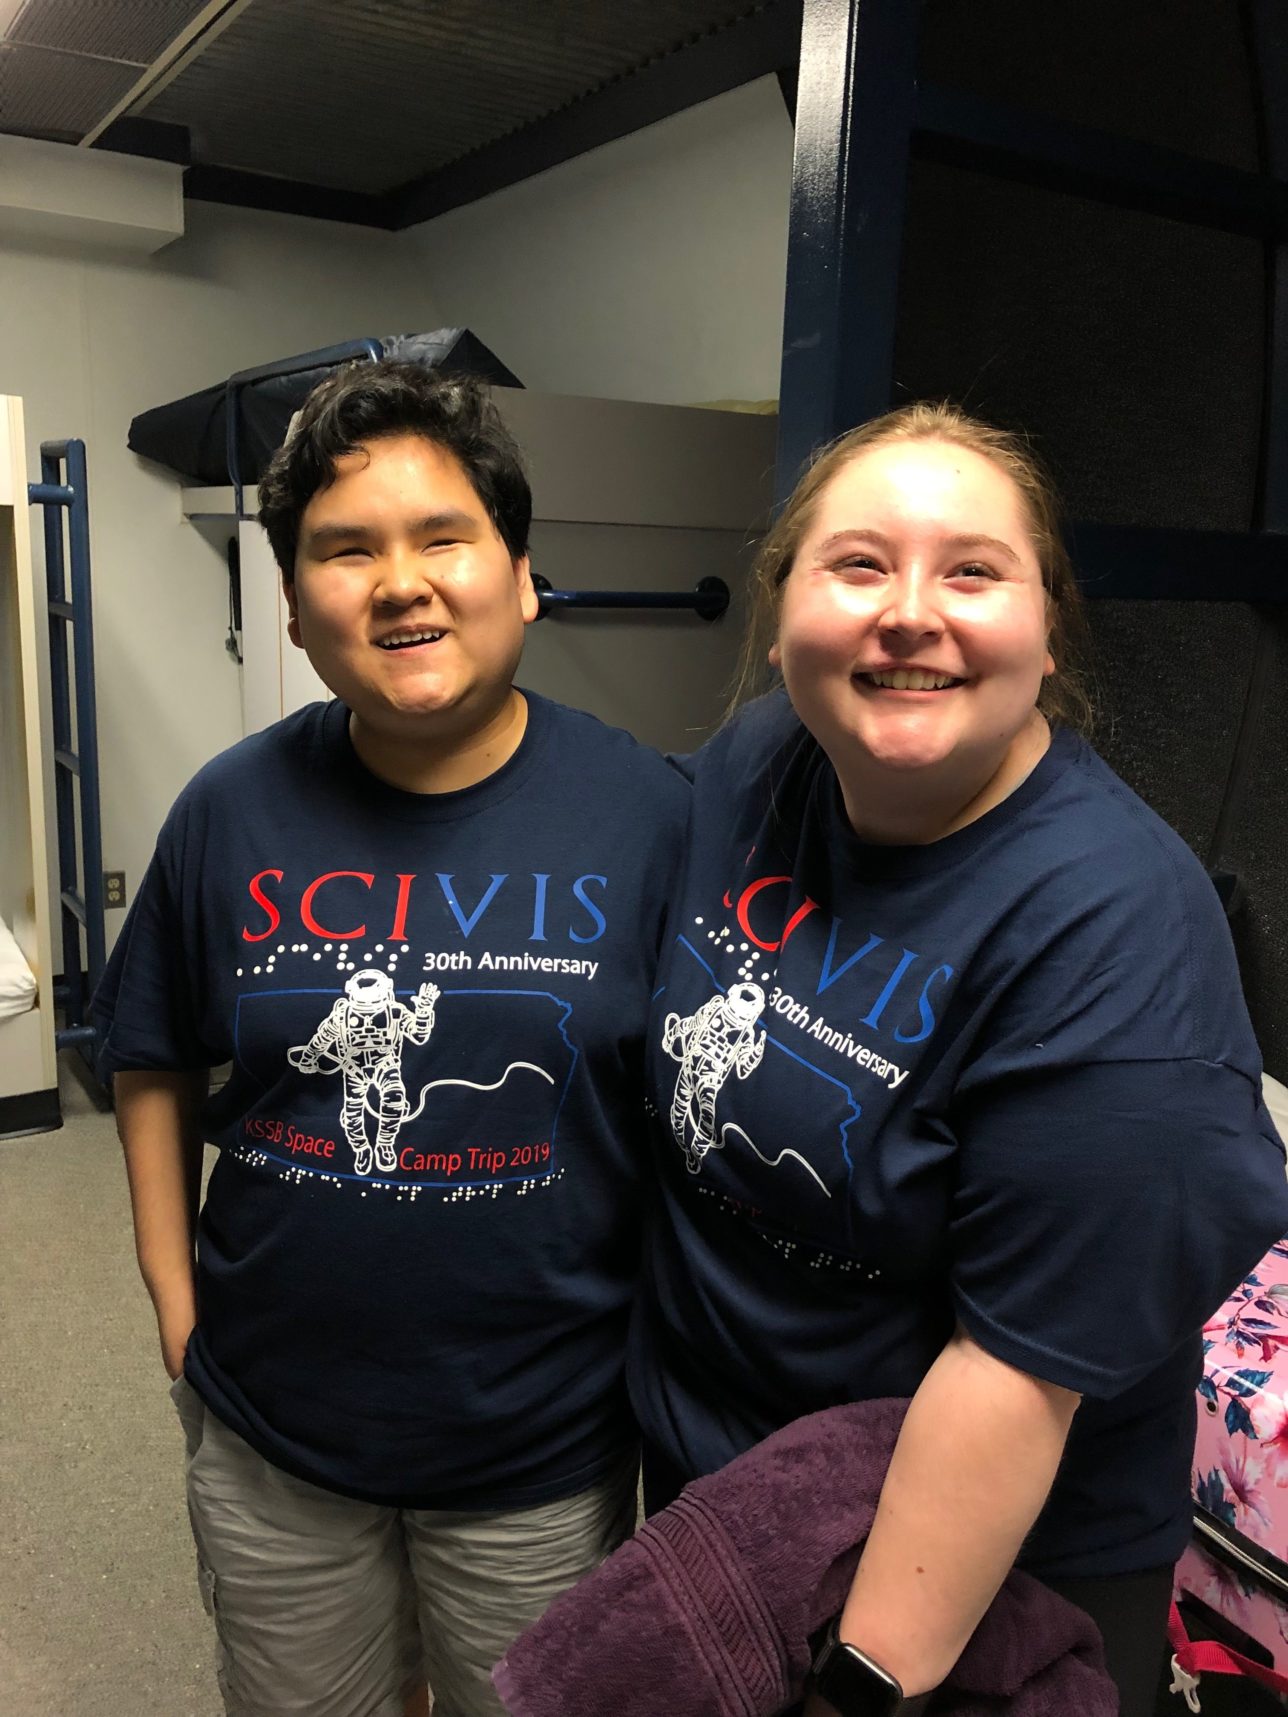 Two female students smiling and wearing space camp t-shirts.